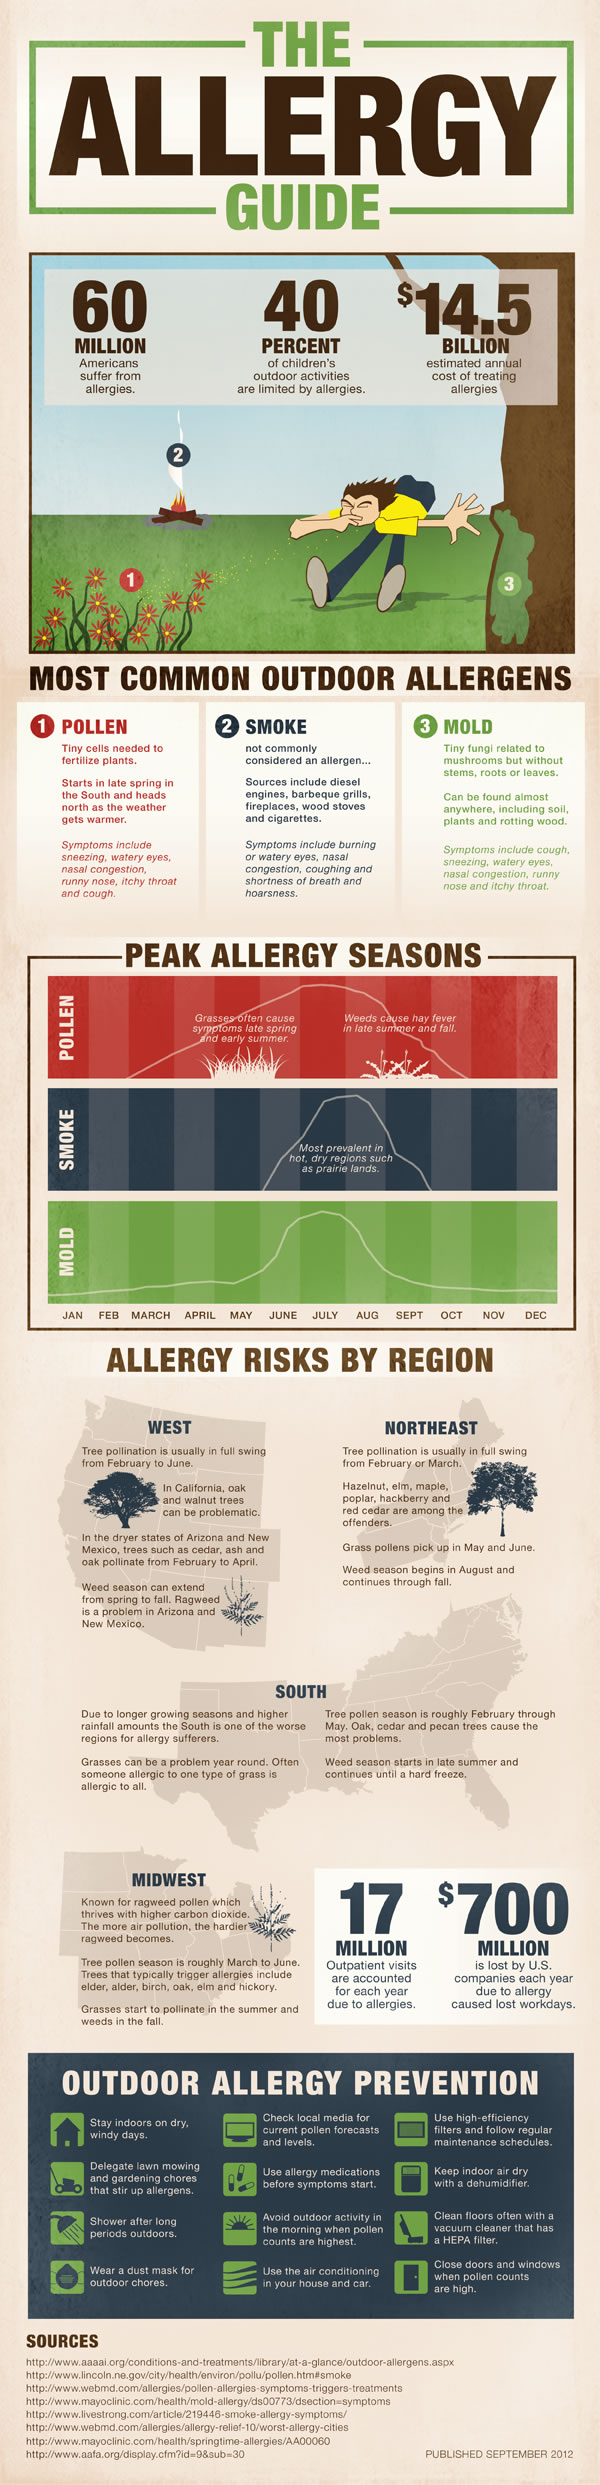 The Allergy Guide